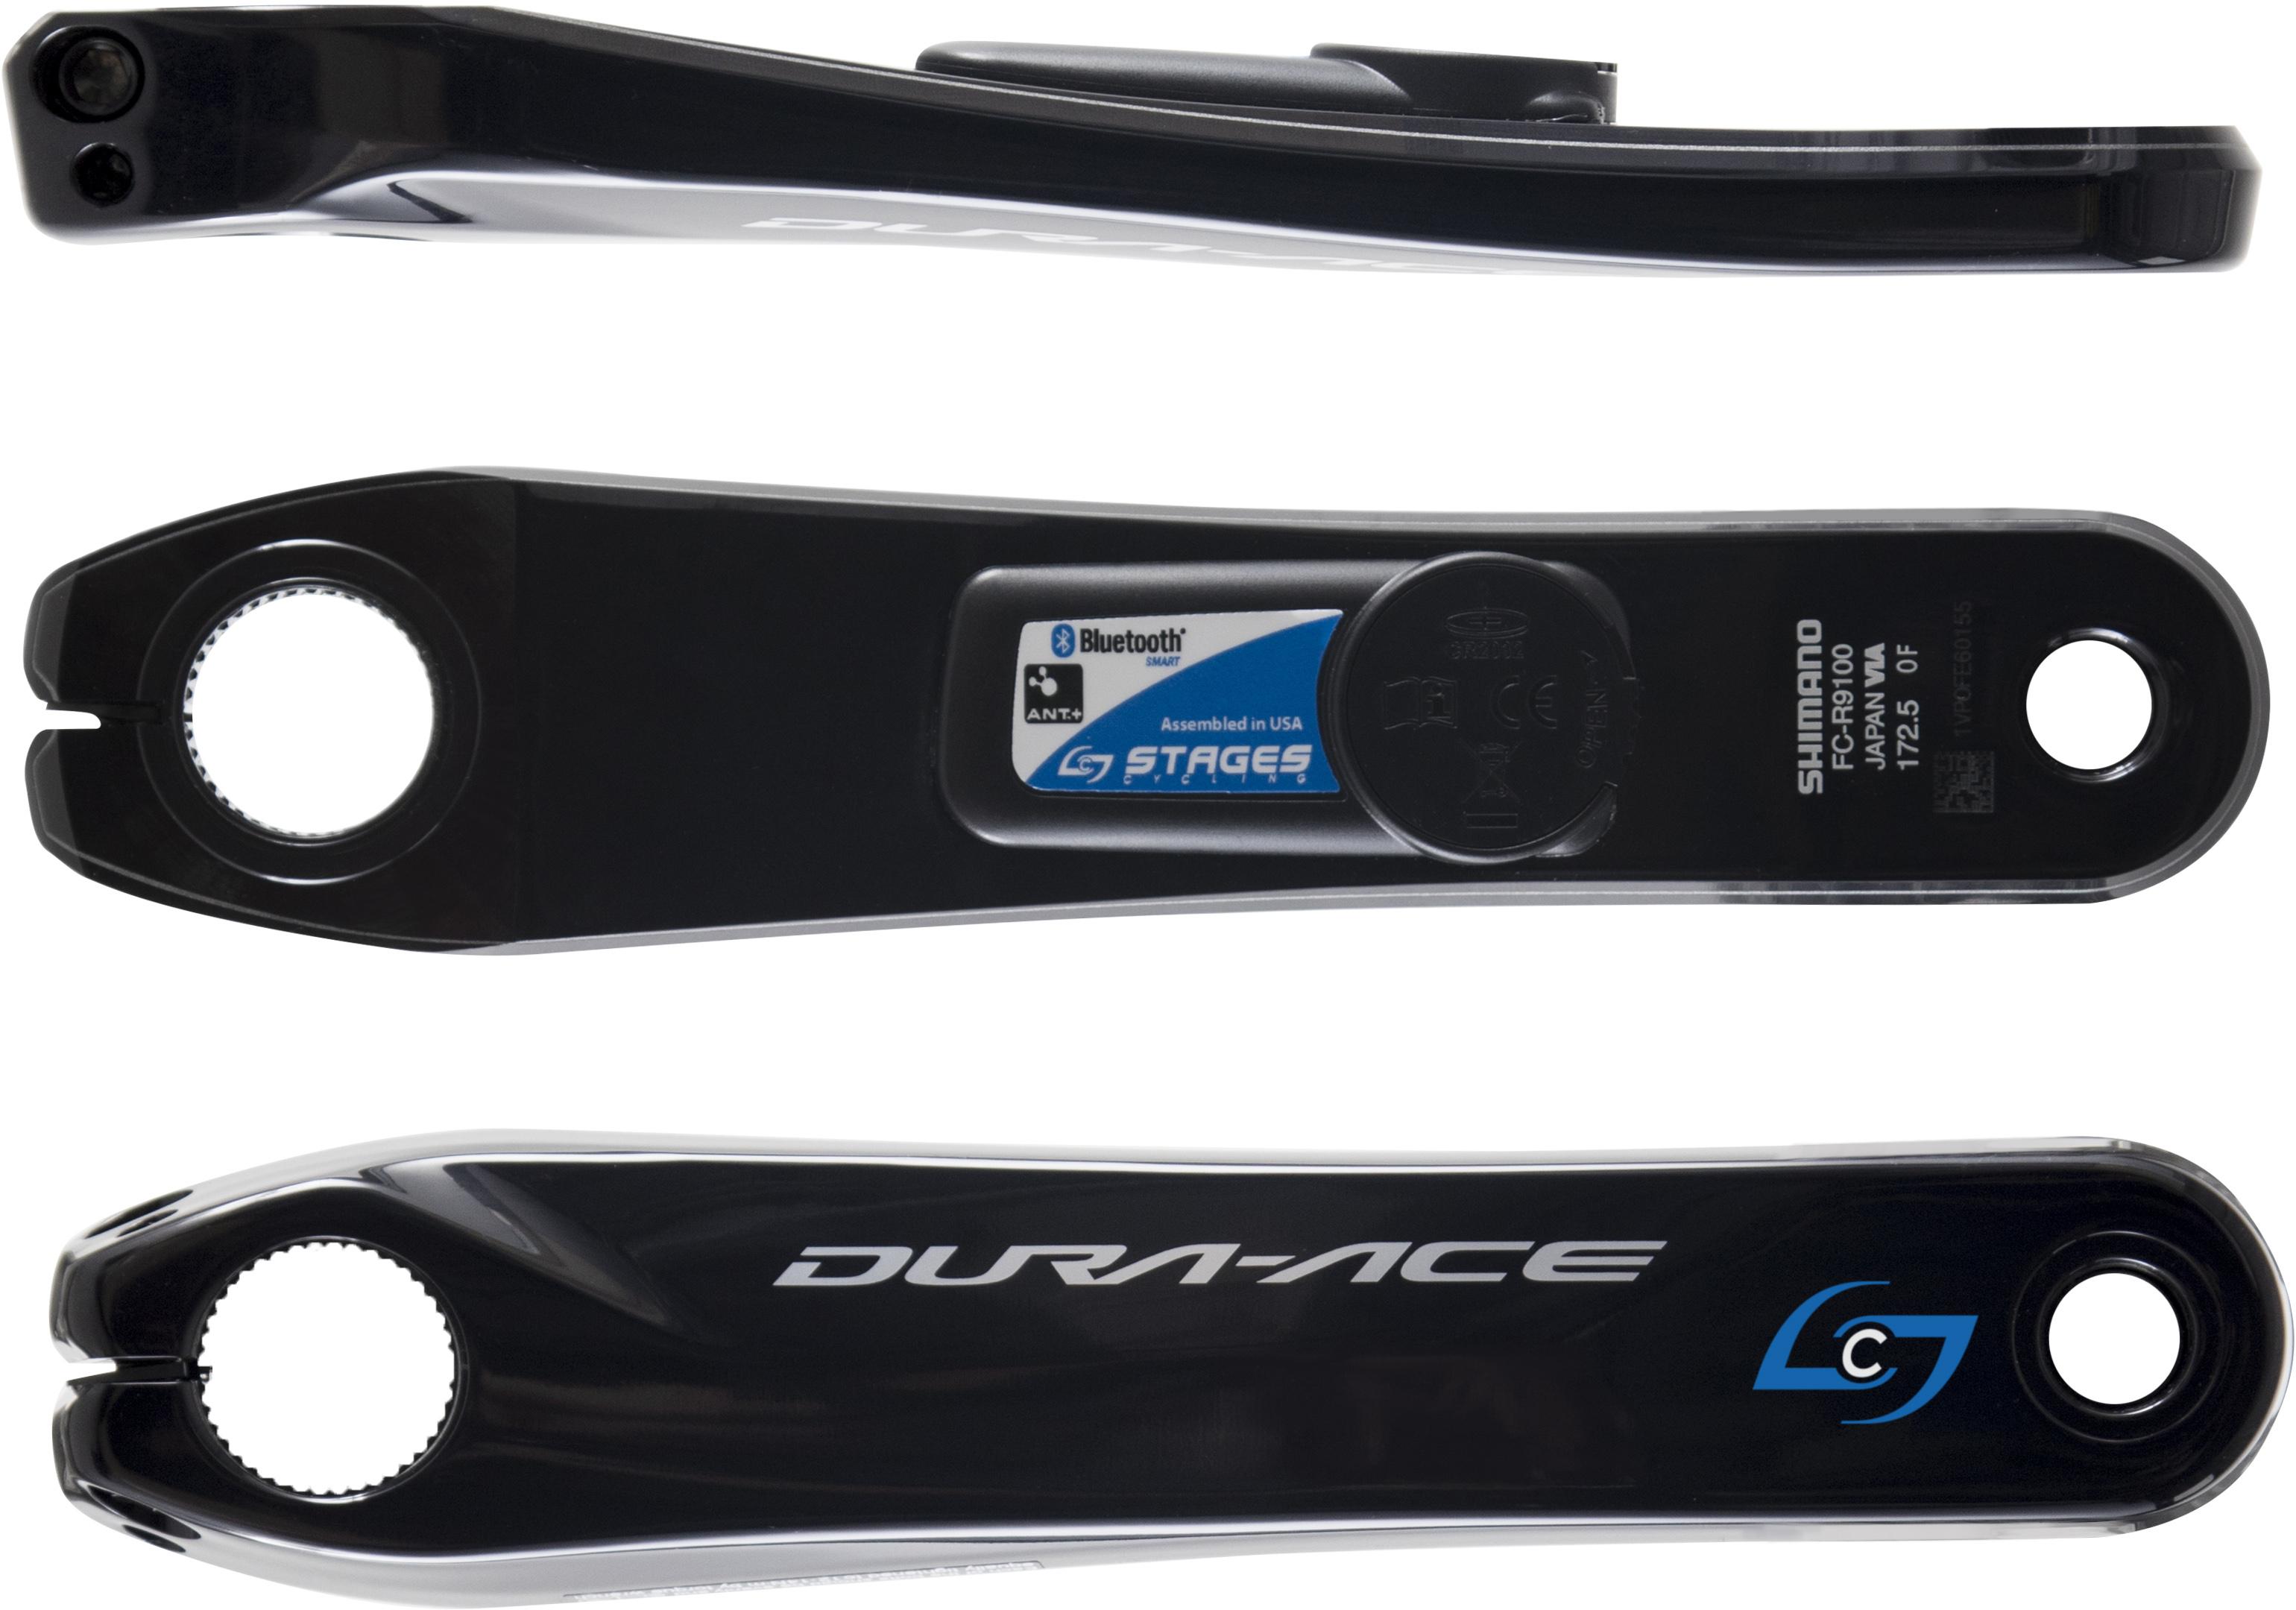 Stages Cycling Power L - Dura-ace 9100 G2 - Black